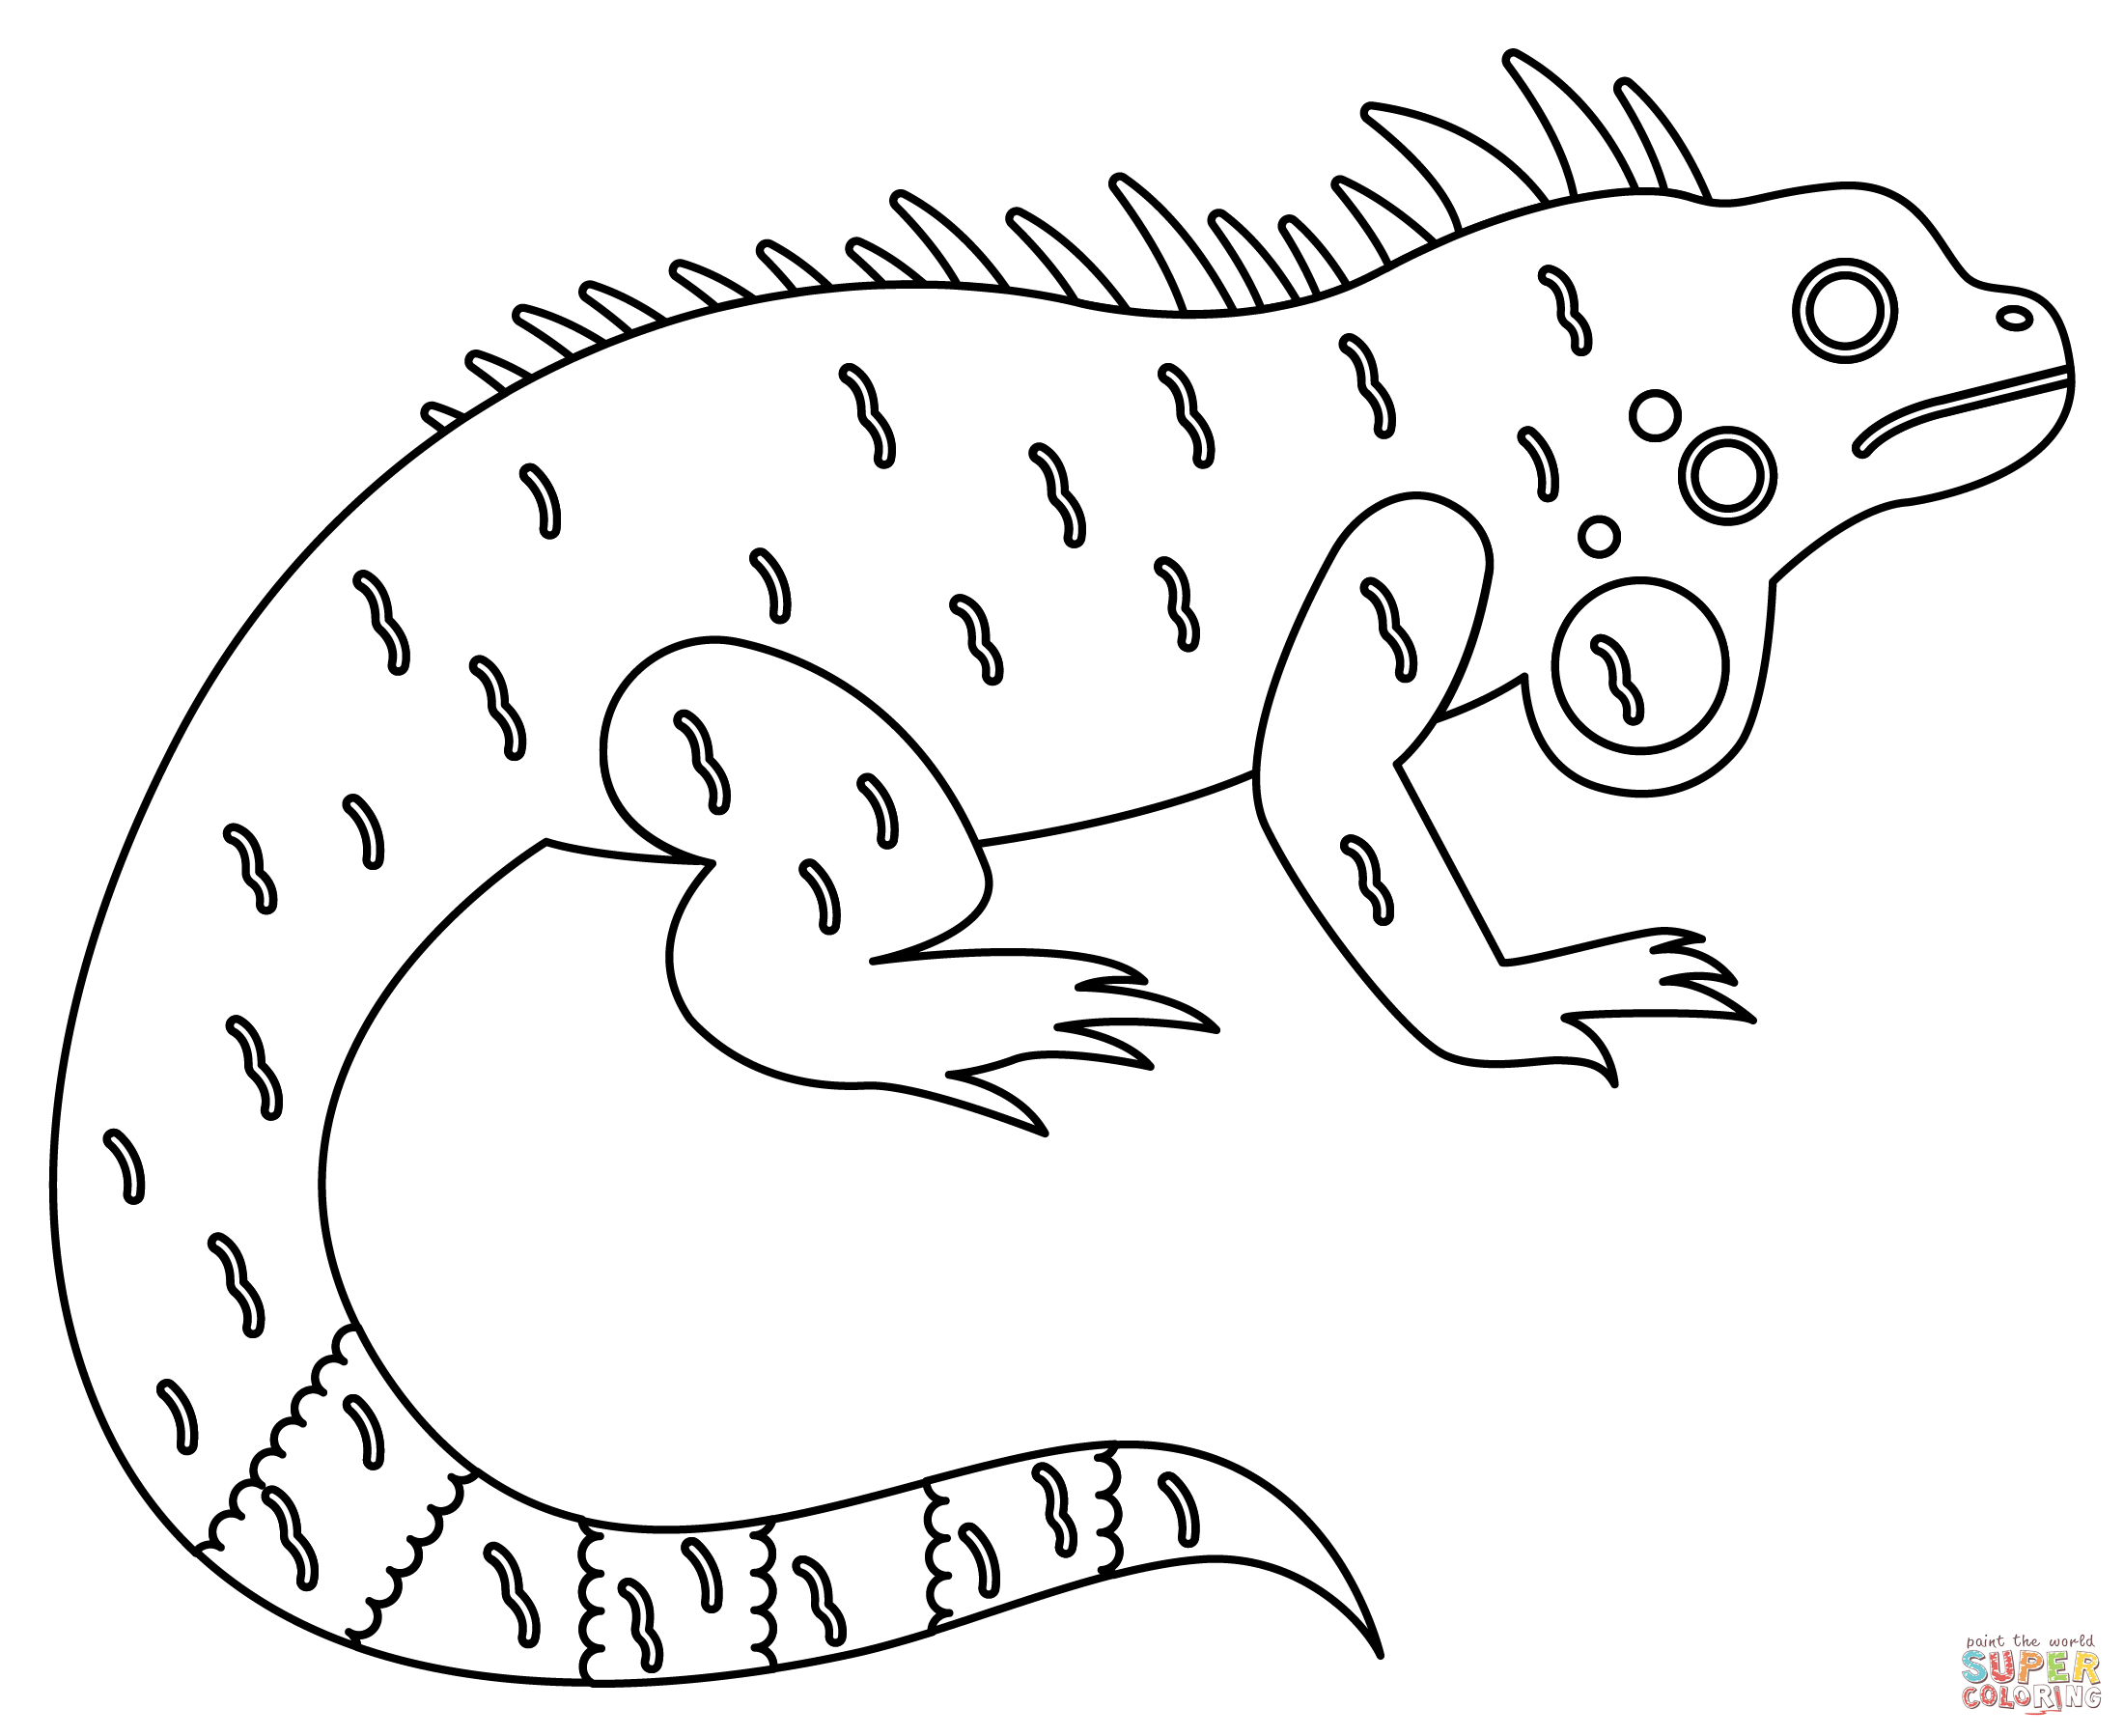 Iguana coloring page free printable coloring pages